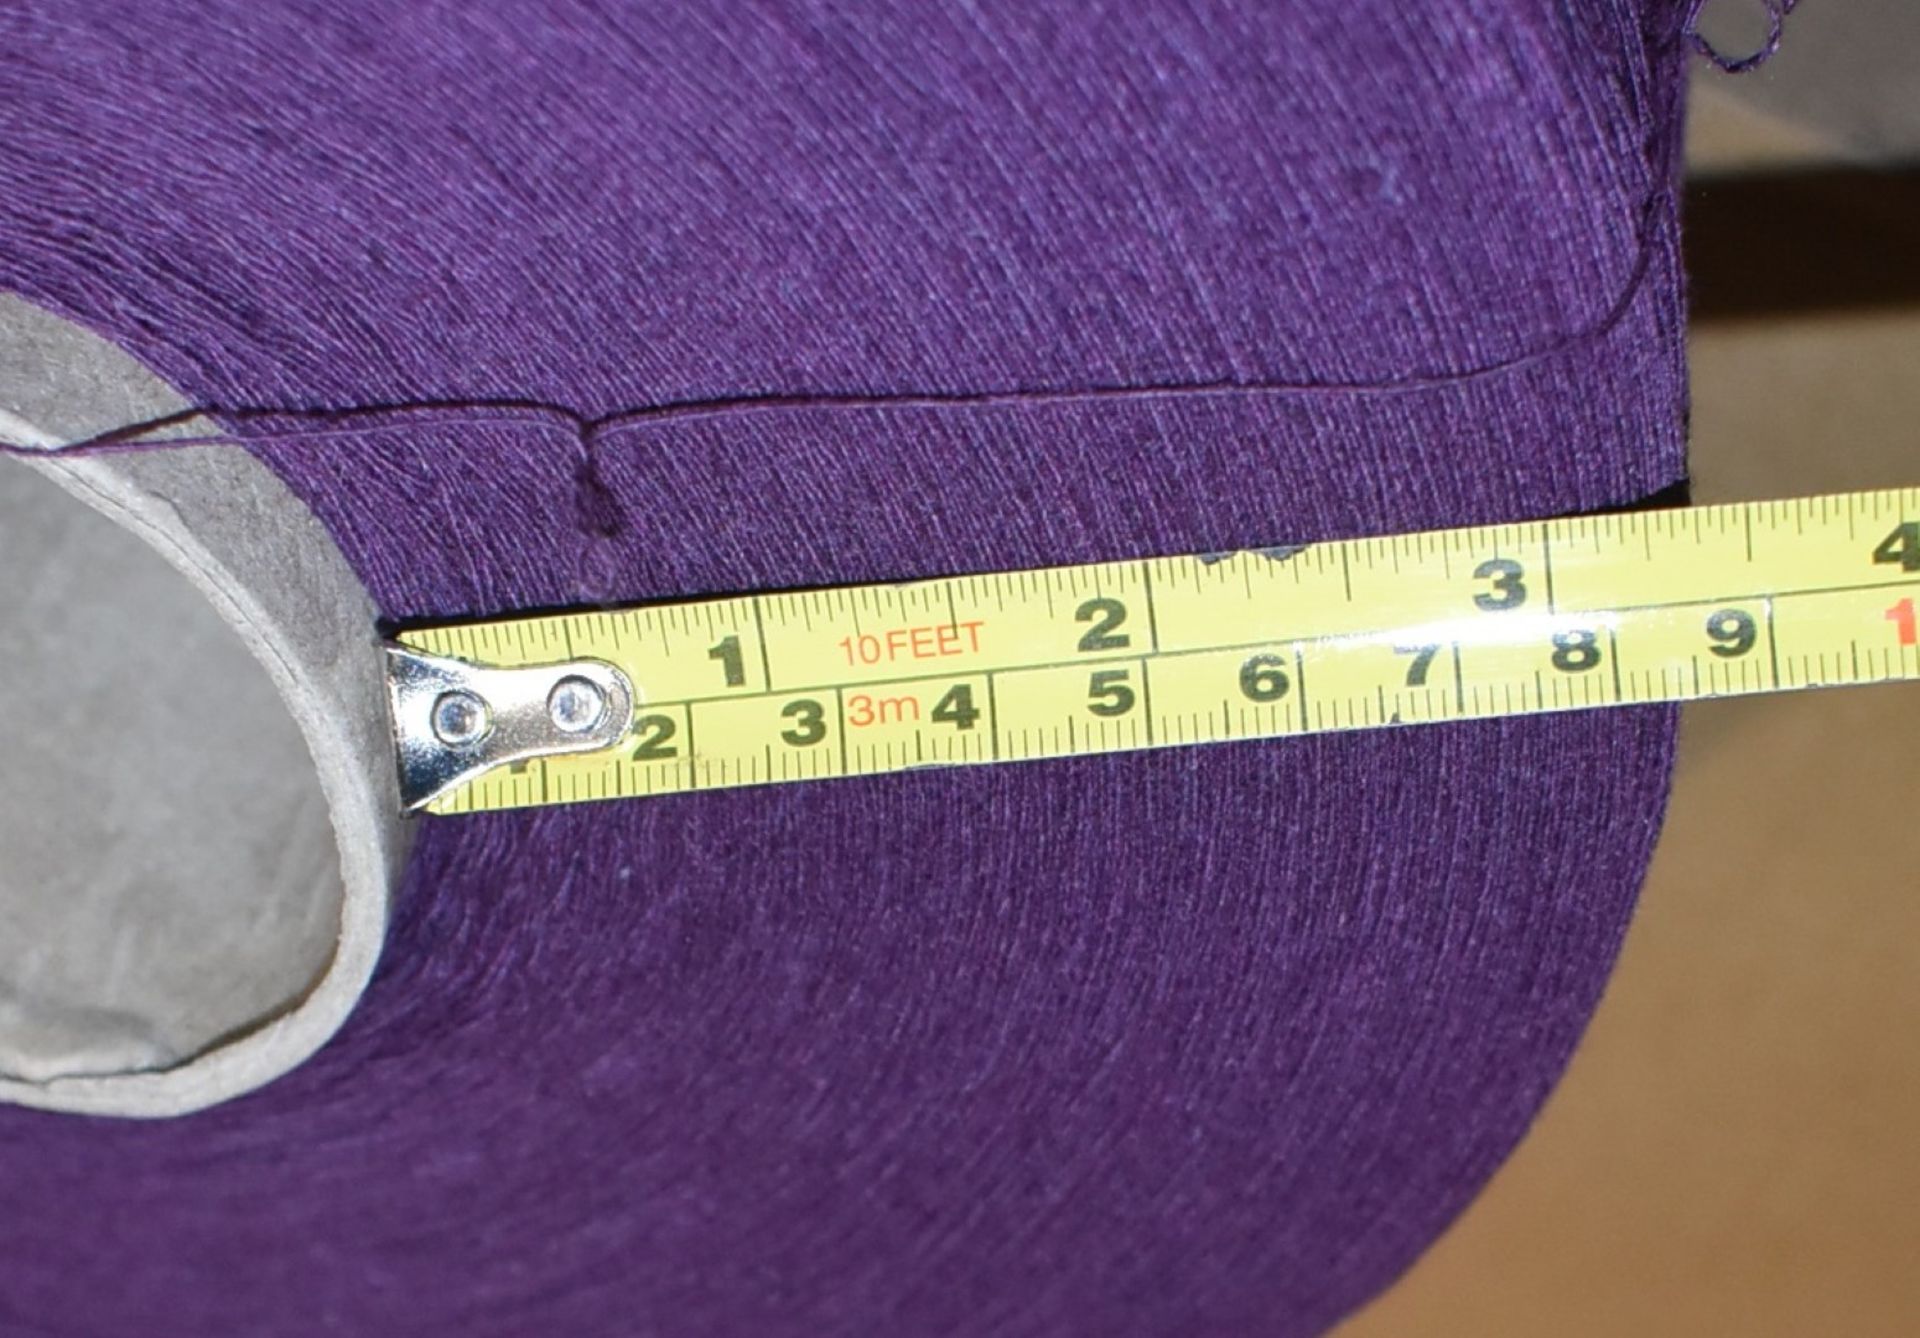 1 x Cone of 1/13 MicroCotton Knitting Yarn - Purple - Approx Weight: 2,300g - New Stock ABL Yarn - Image 10 of 10